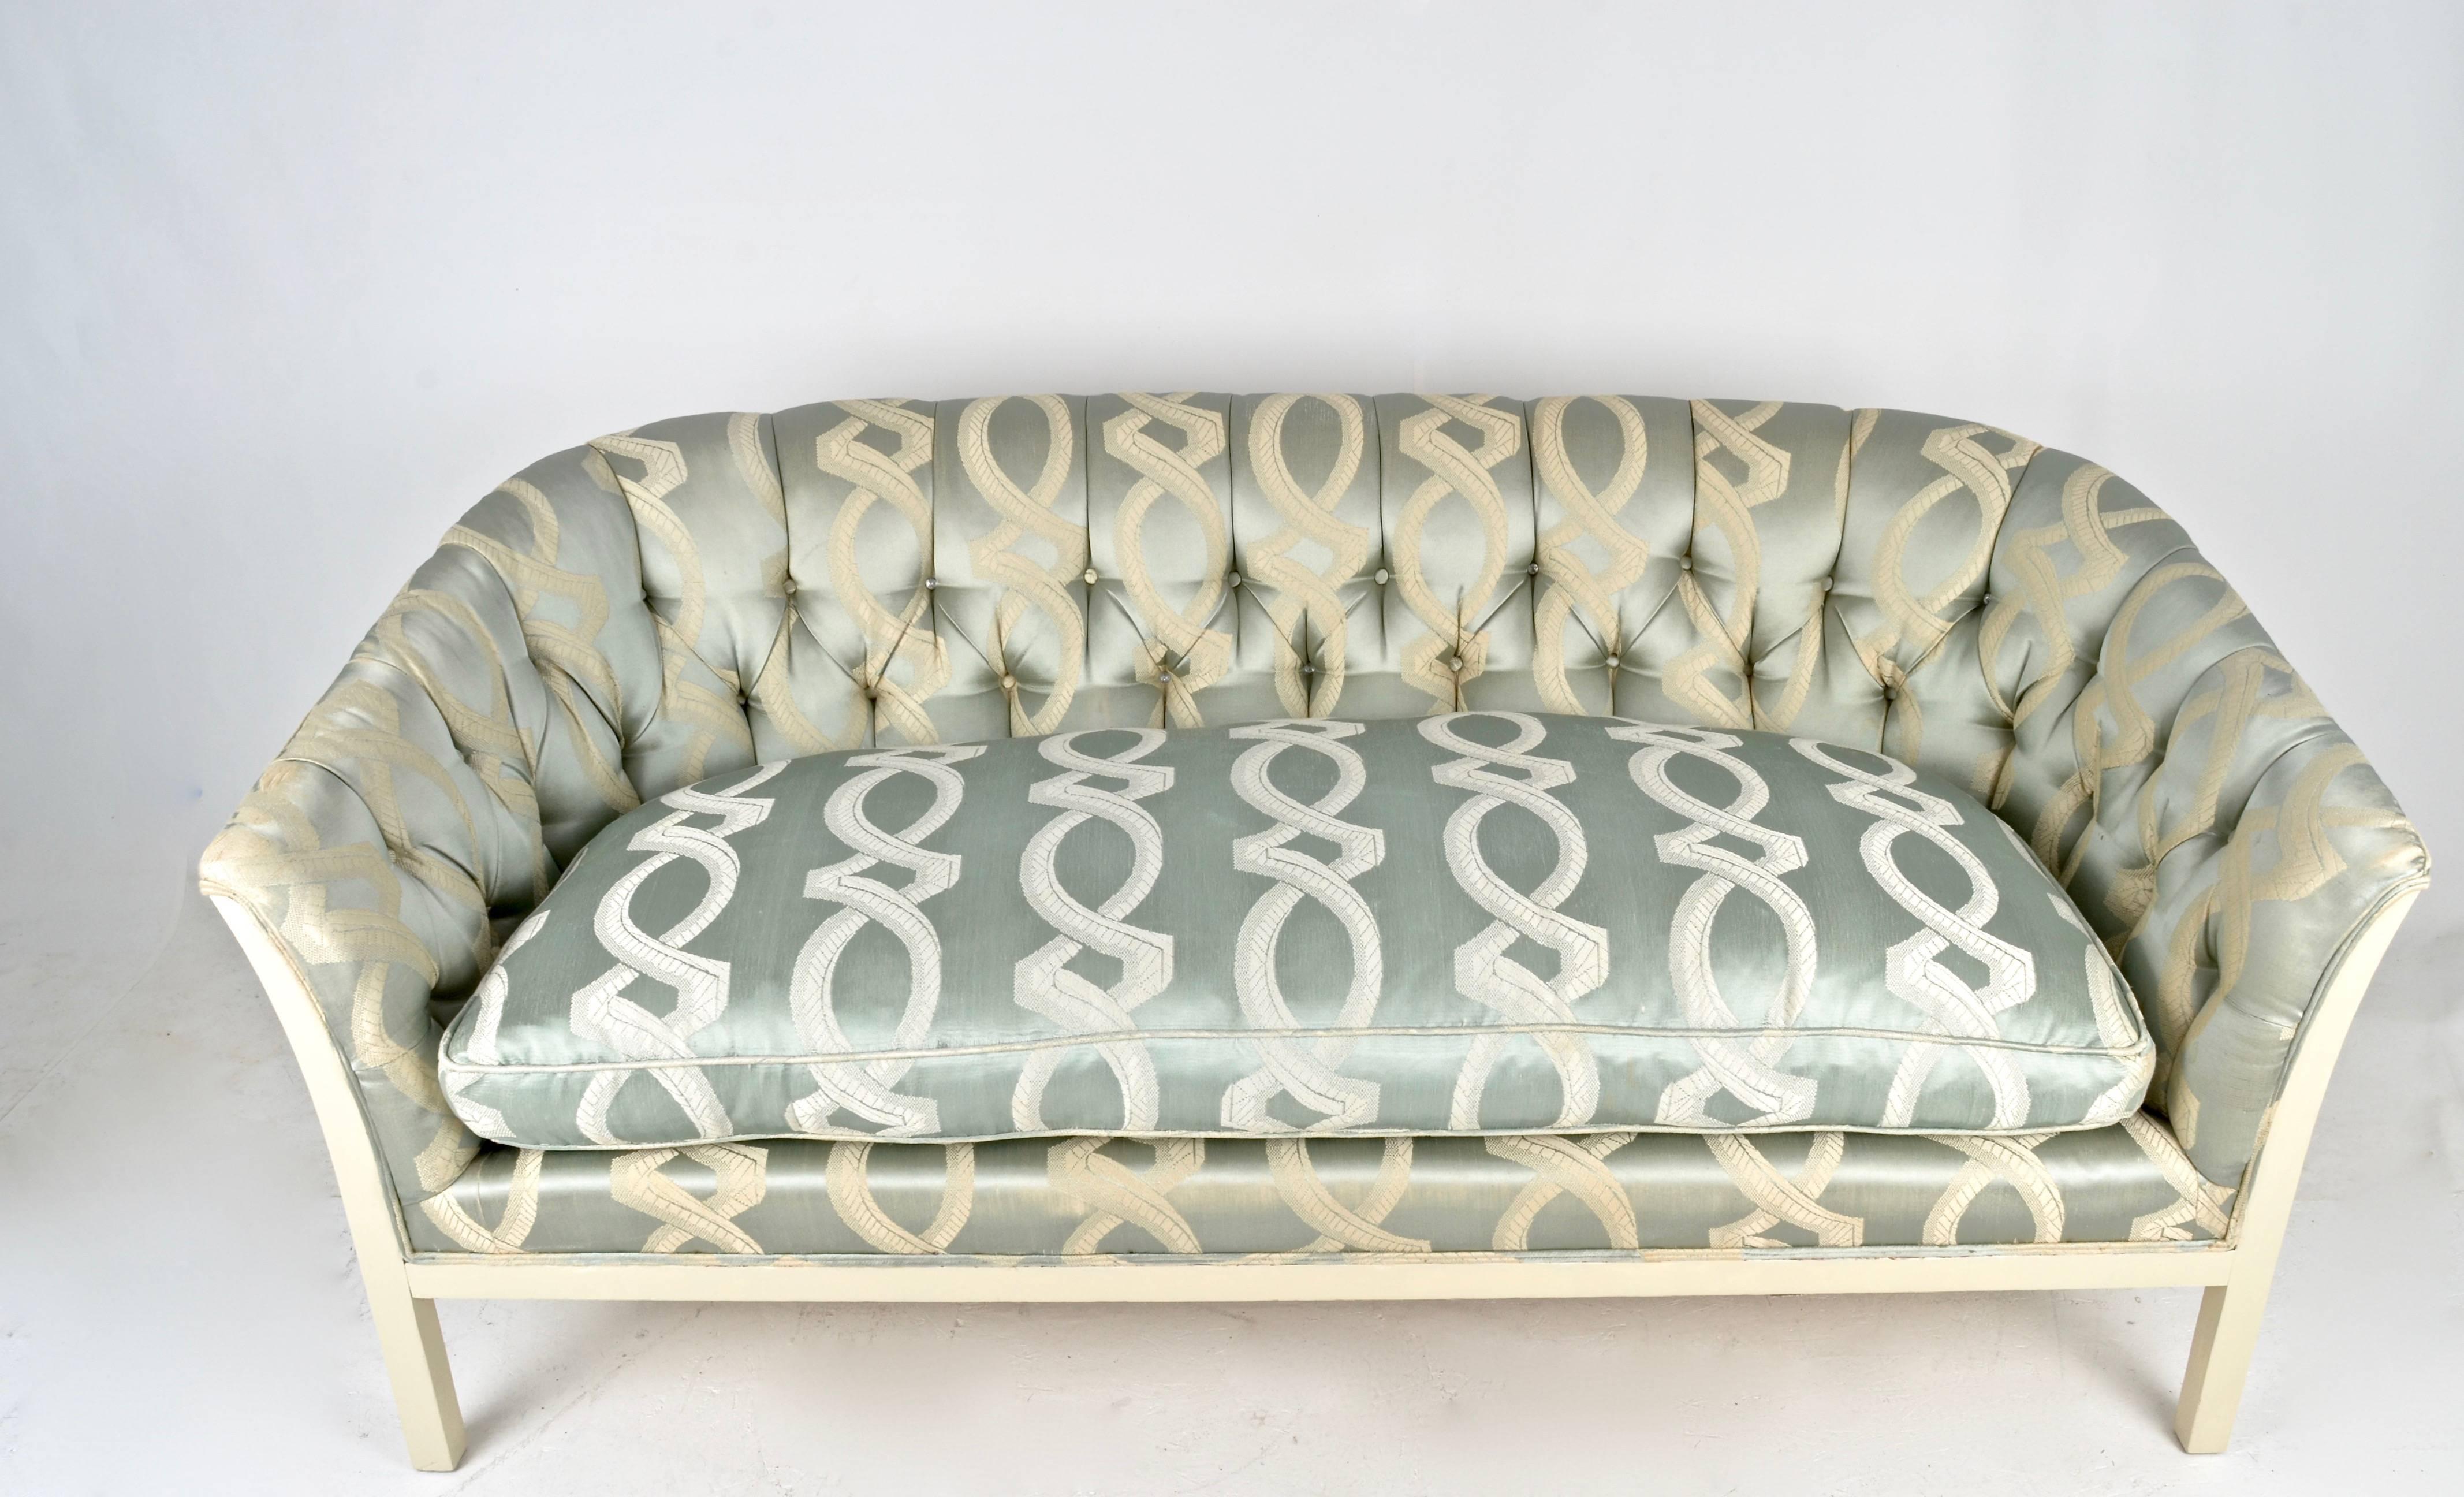 Featuring a tufted back and fine quality all down single cushion, this small sofa combines great lines with comfort. The original silk fabric is quite clean but shown some signs of wear and the tufting is missing covers on a few of the buttons.